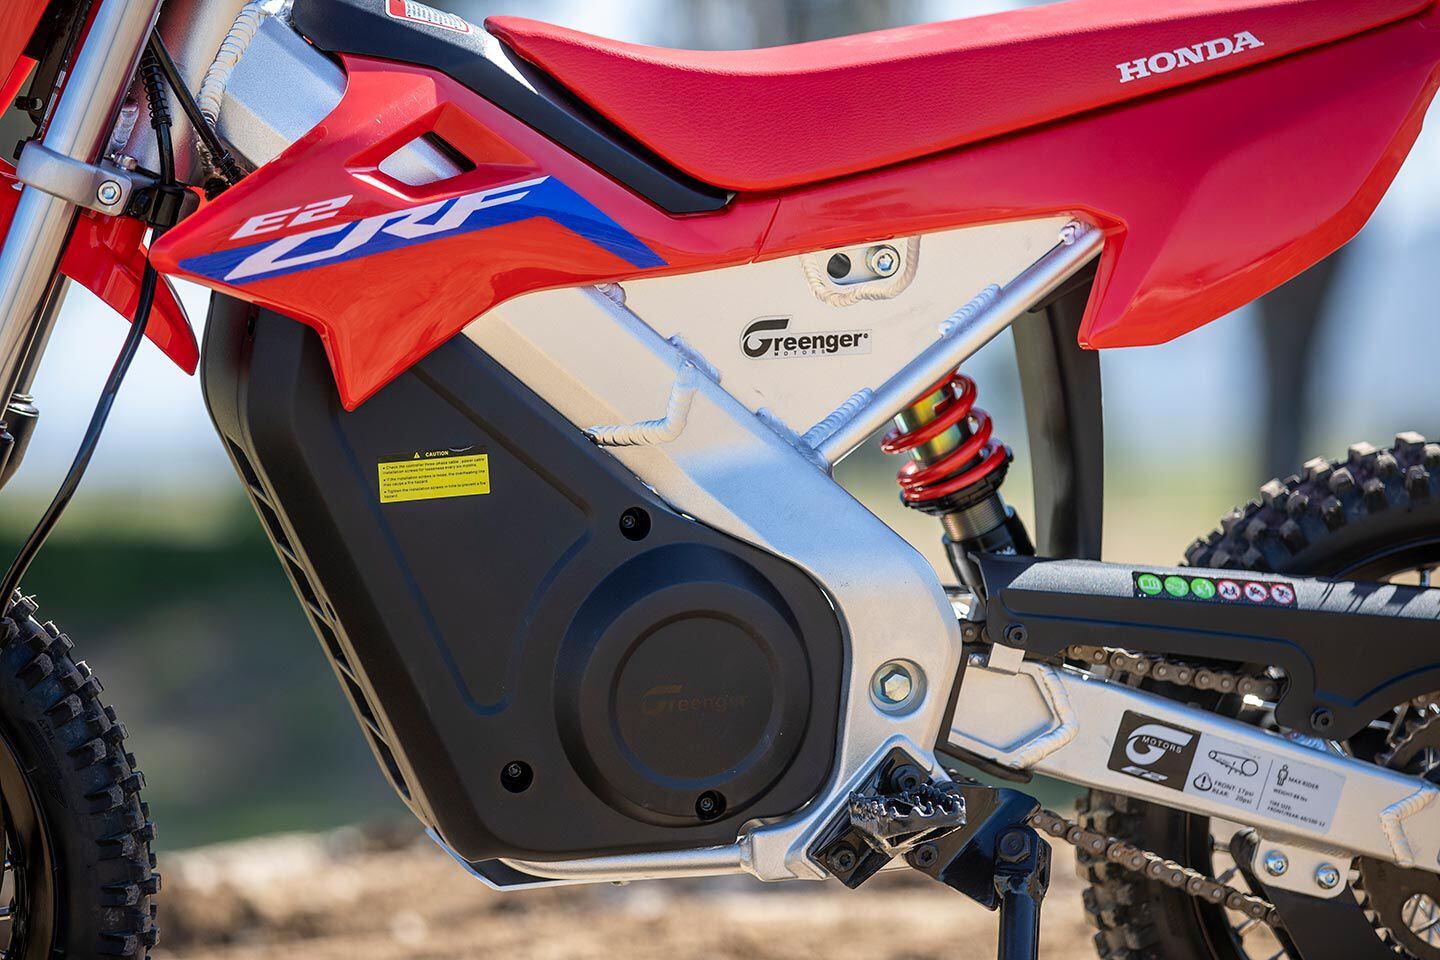 The CRF-E2 is powered by a quiet, air-cooled brushless motor that’s capable of speeds up to 20 mph.